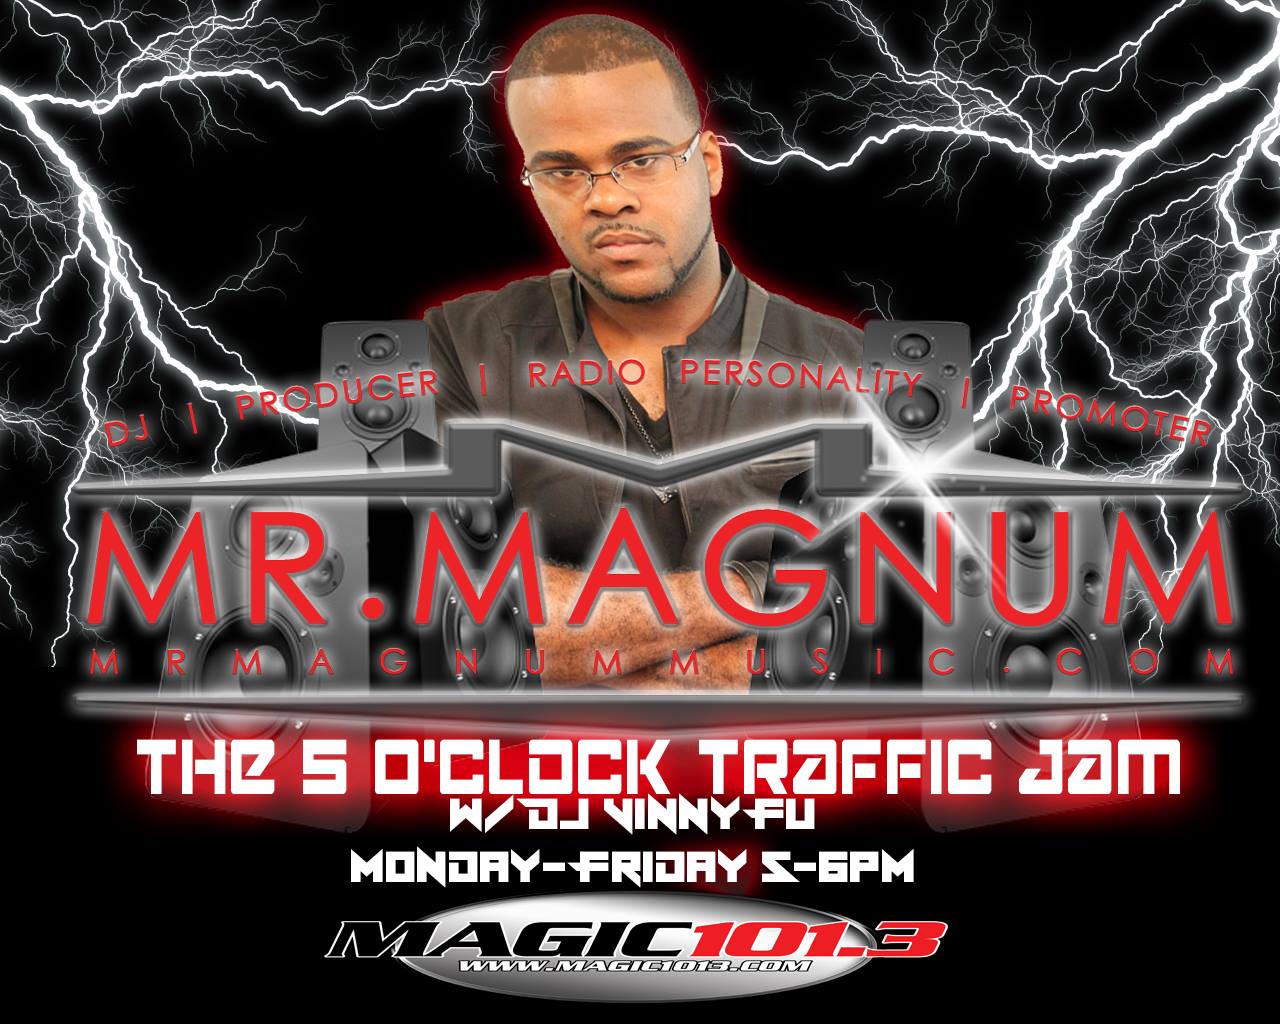 The 5 O'Clock Traffic Jam with Mr. Magnum on Magic 101.3 in Gainesville, FL, Live DJ Mix.